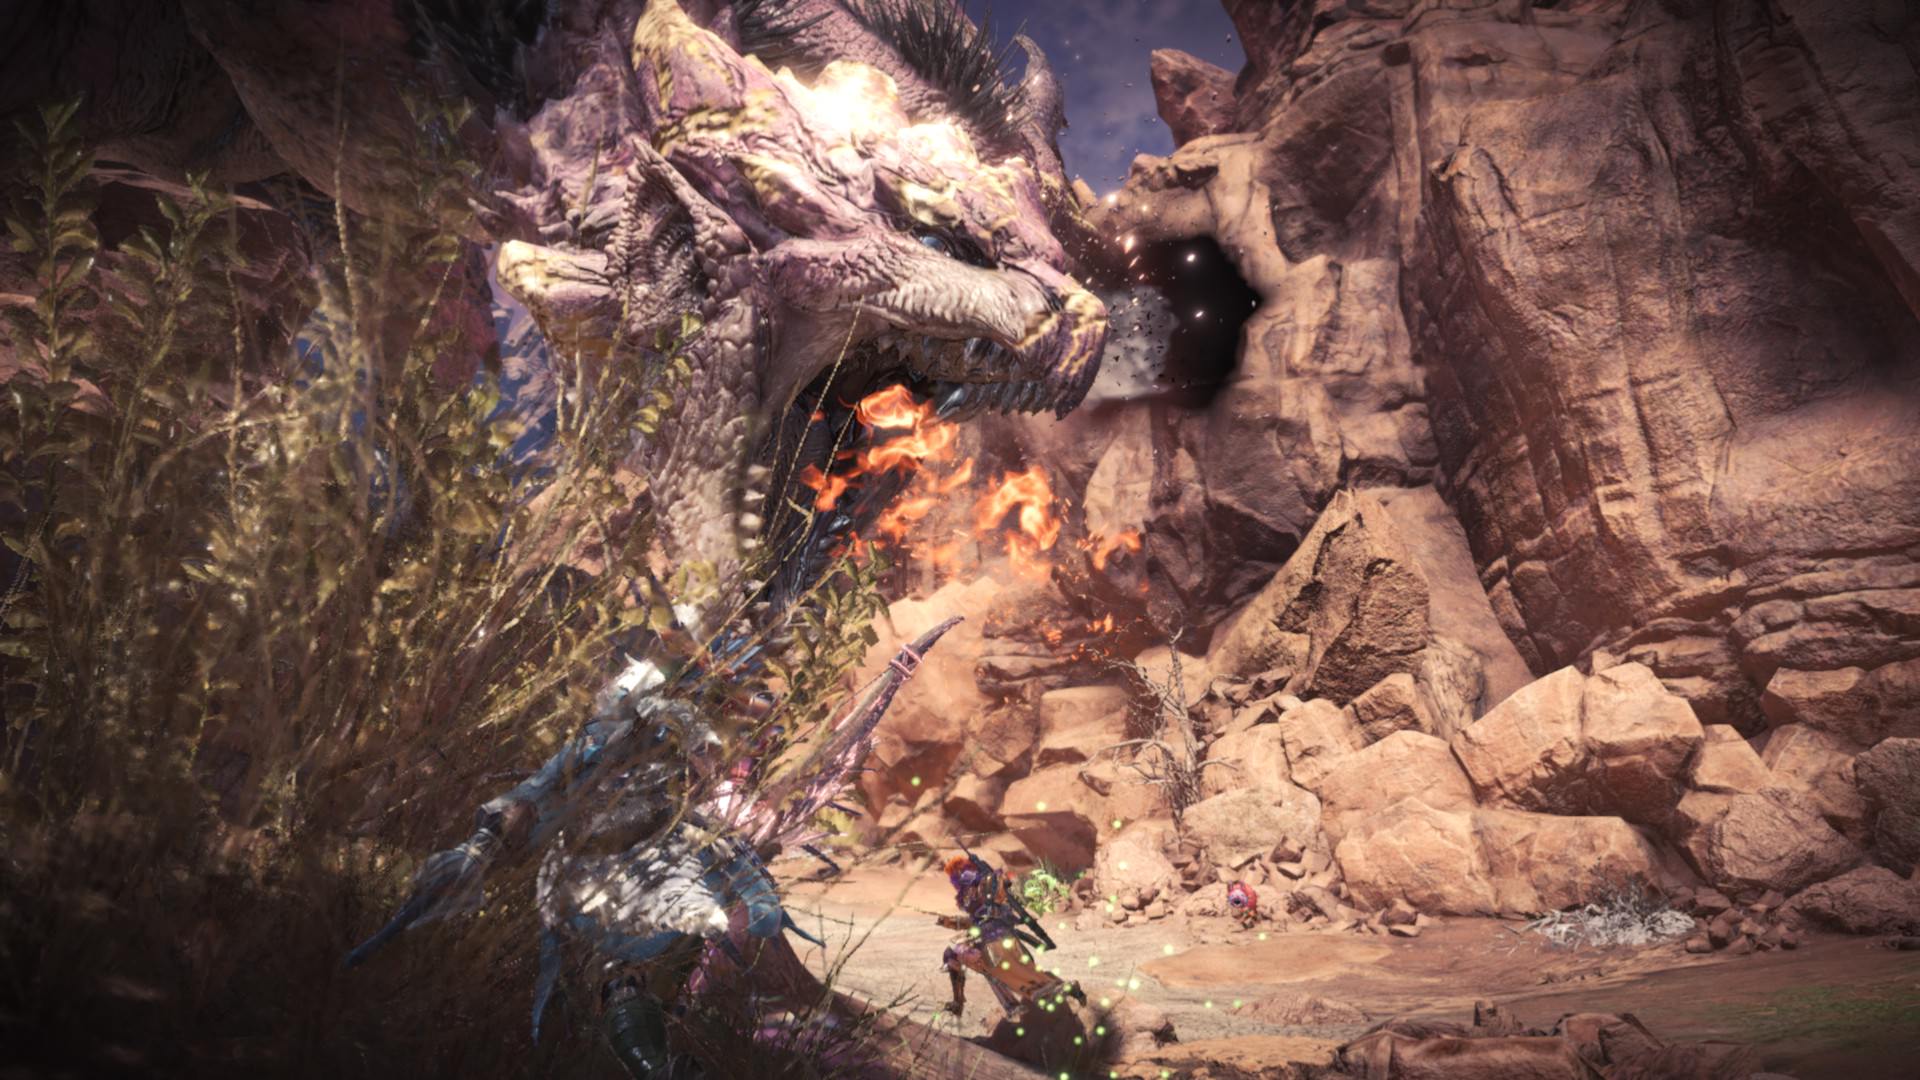 Pink Rathian knew her end was coming, roaring one last time